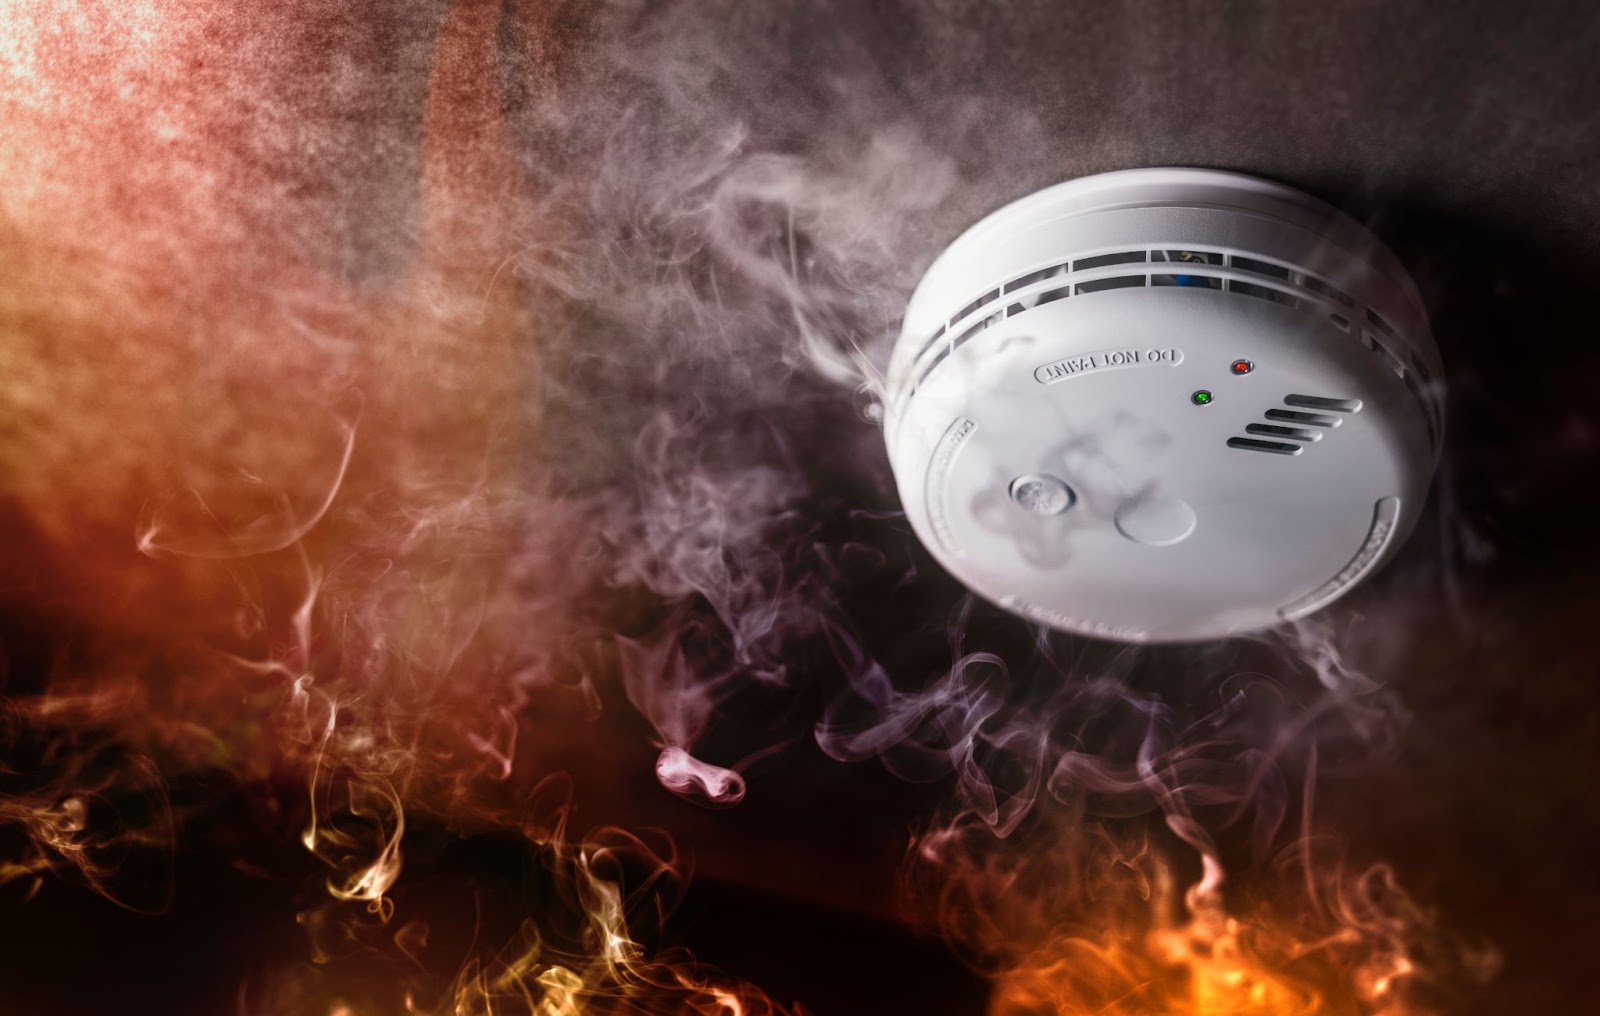 Smoke detector surrounded by flames, emphasizing importance of fire prevention and suppression systems